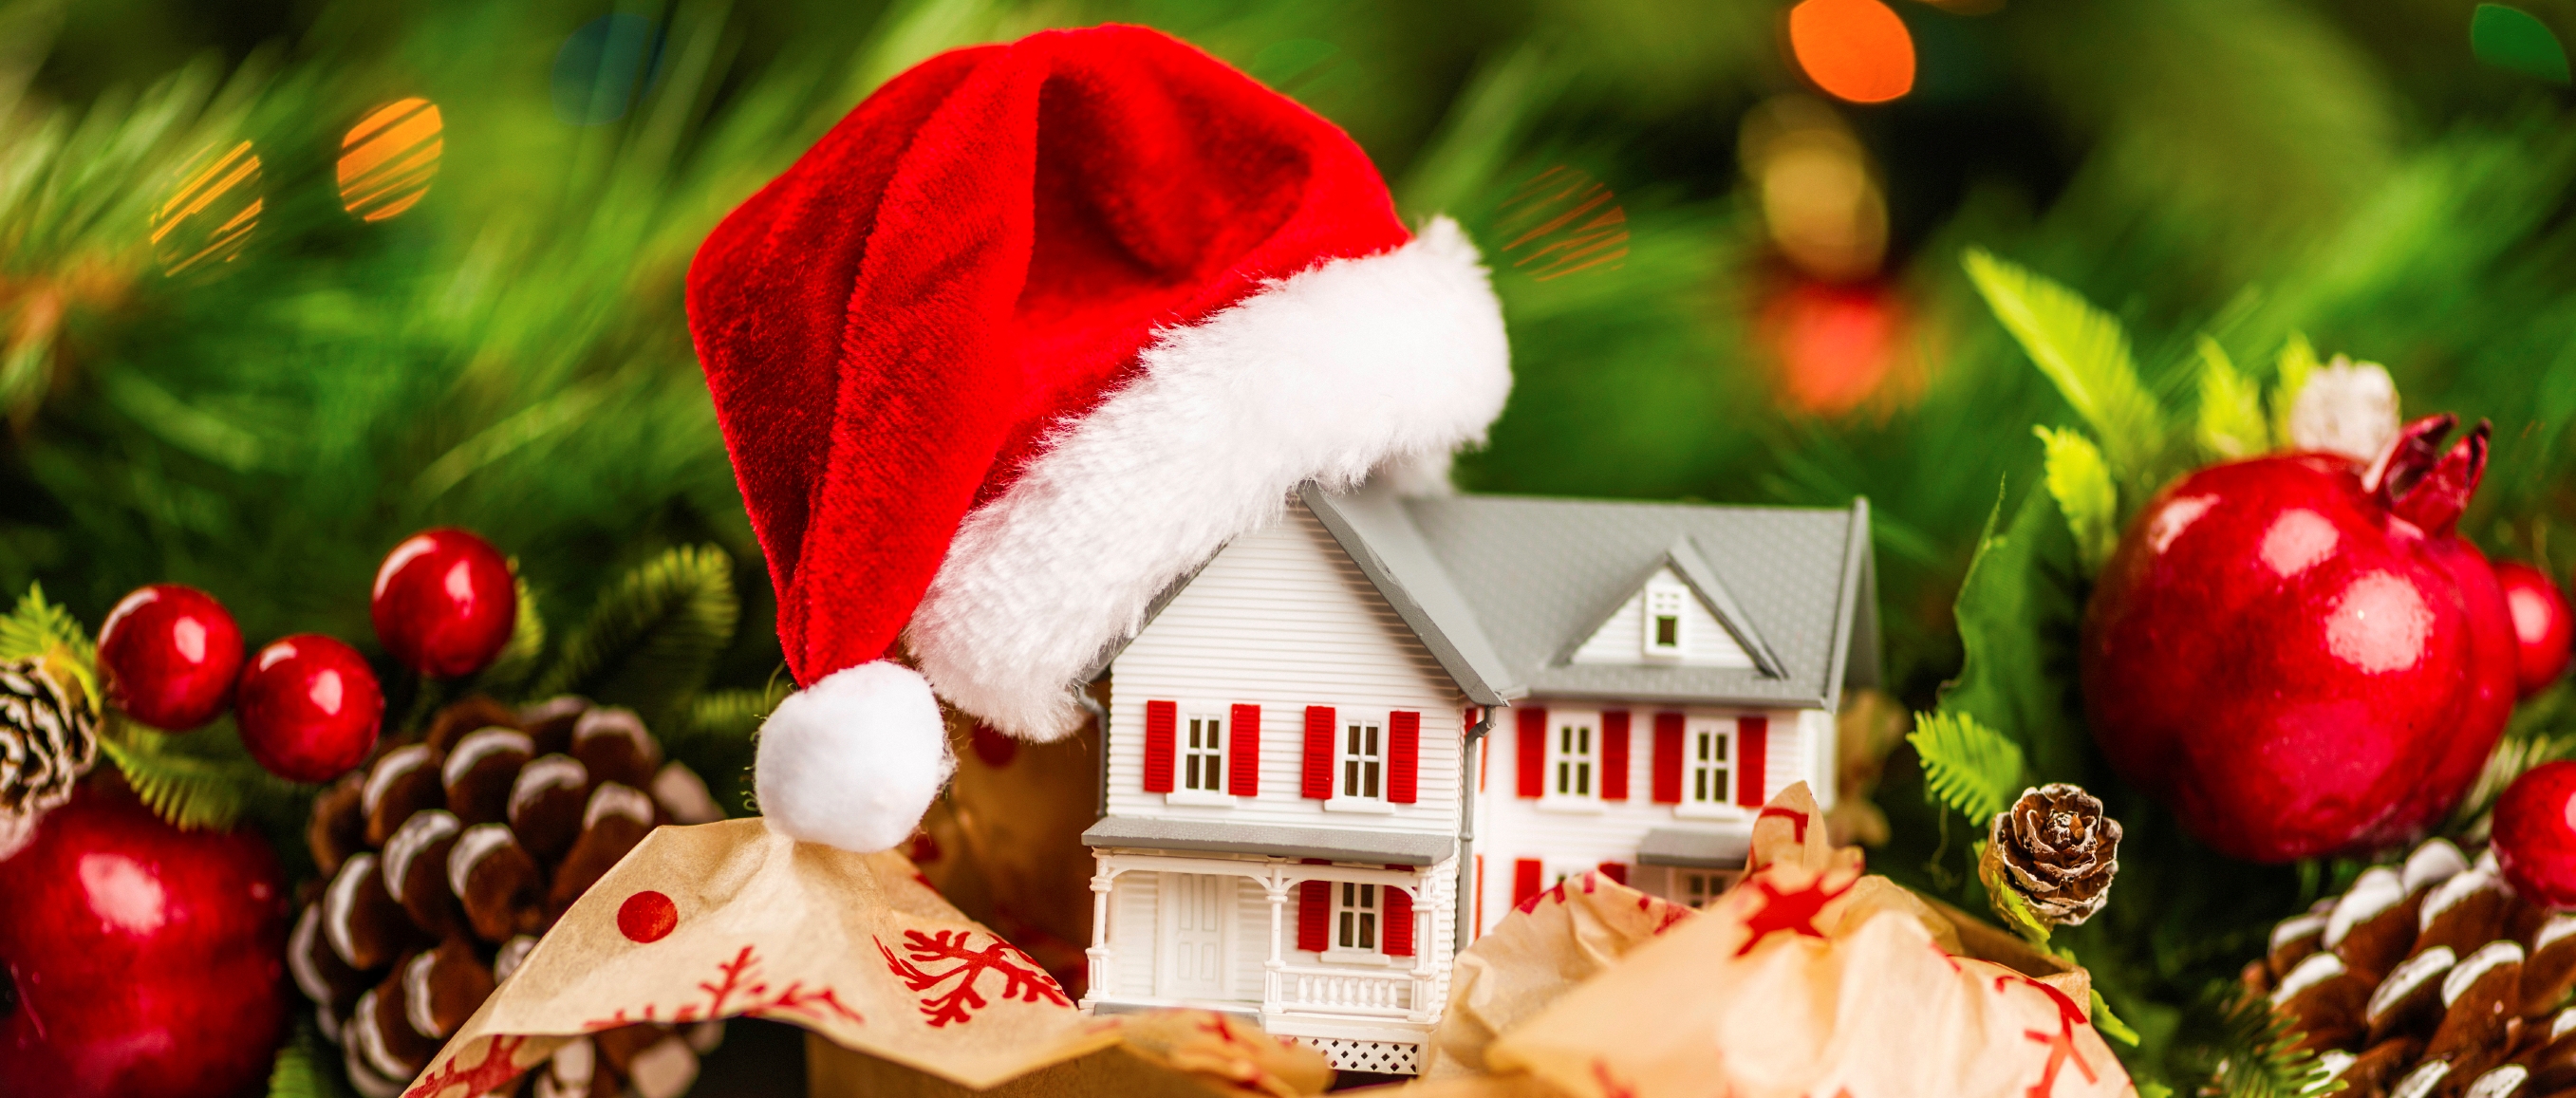 Is Christmas a good time to buy property?